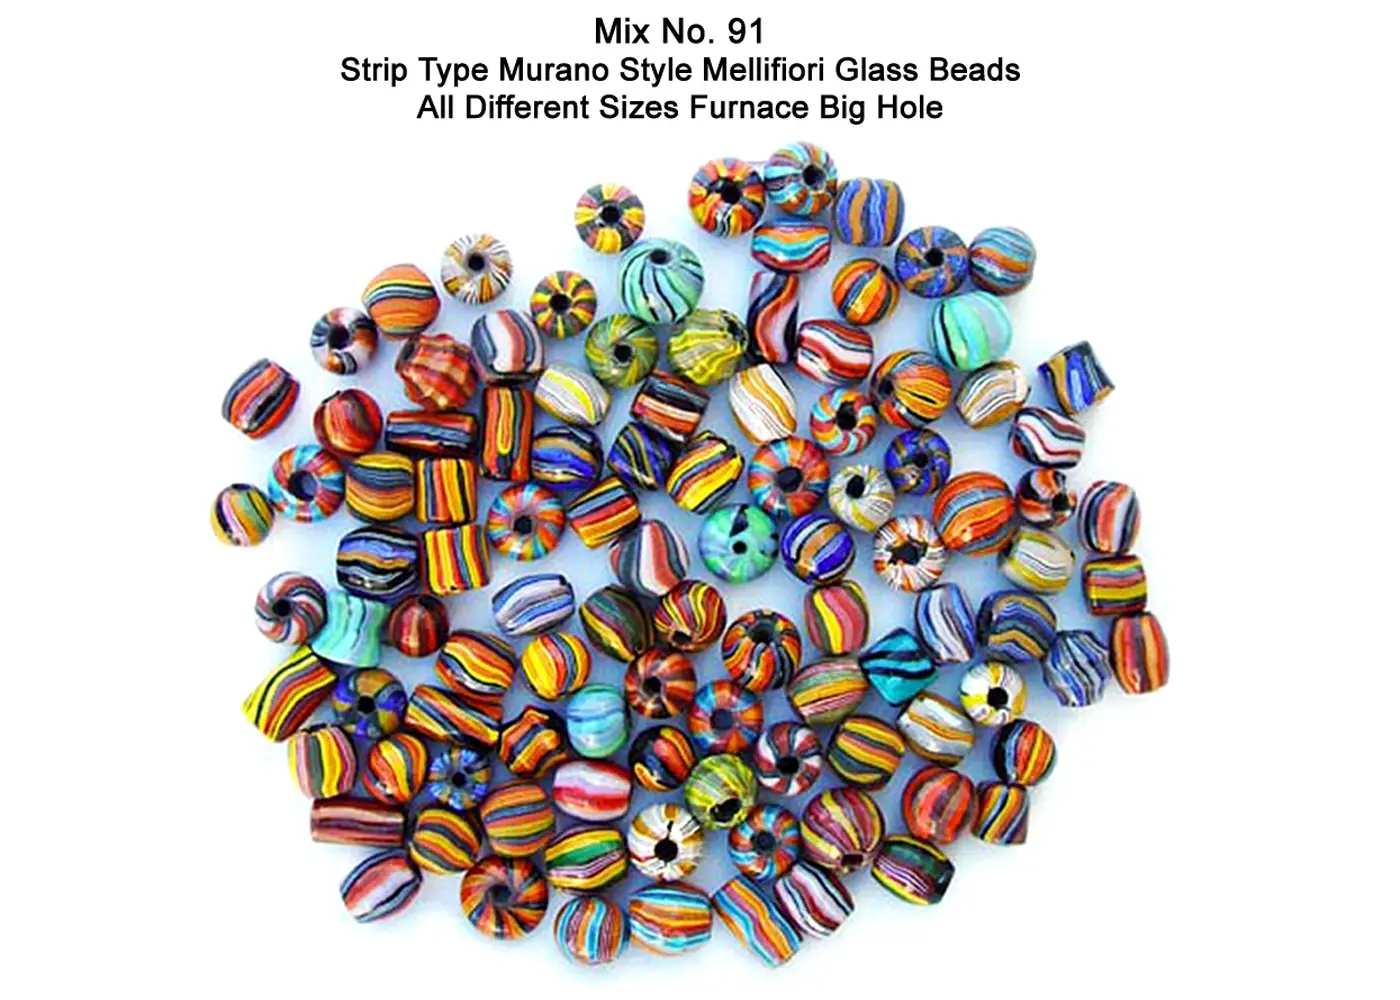 Strip type Murano style Mellifiori mix glass beads all different sizes farnace big hole